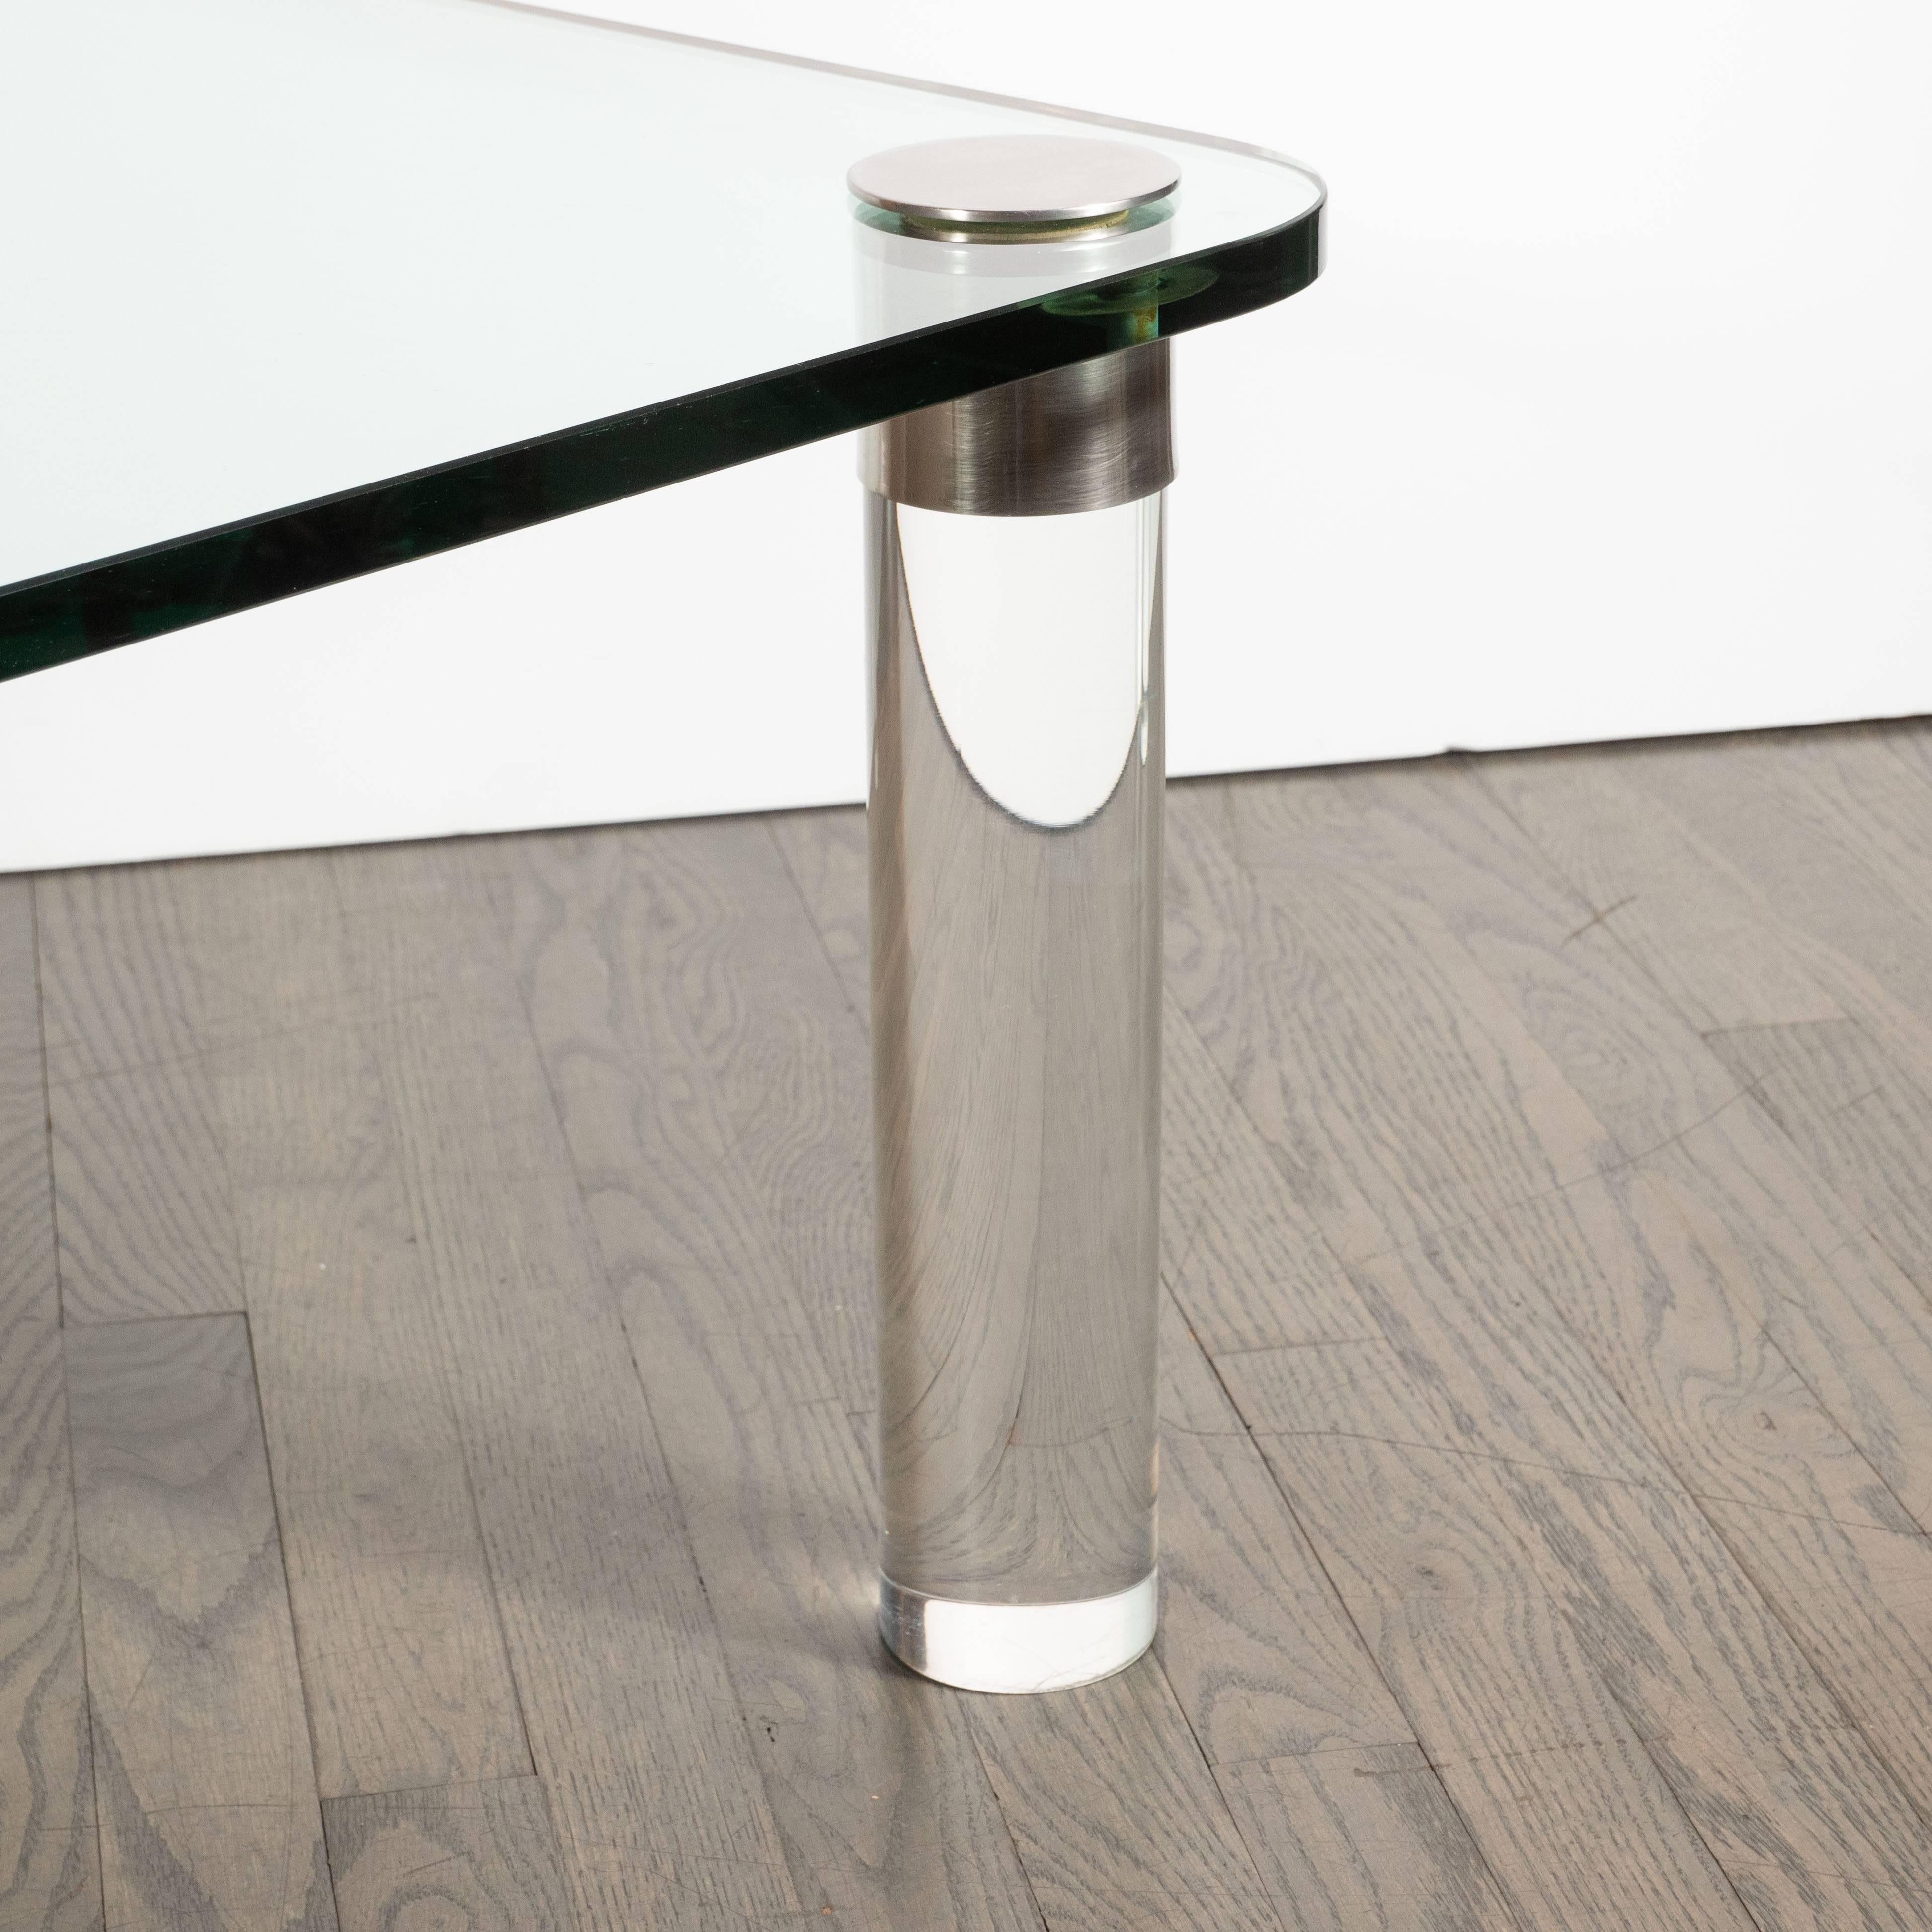 Stainless Steel Mid-Century Modern Lucite, Chrome and Glass Cocktail Table, Leon Rosen for Pace